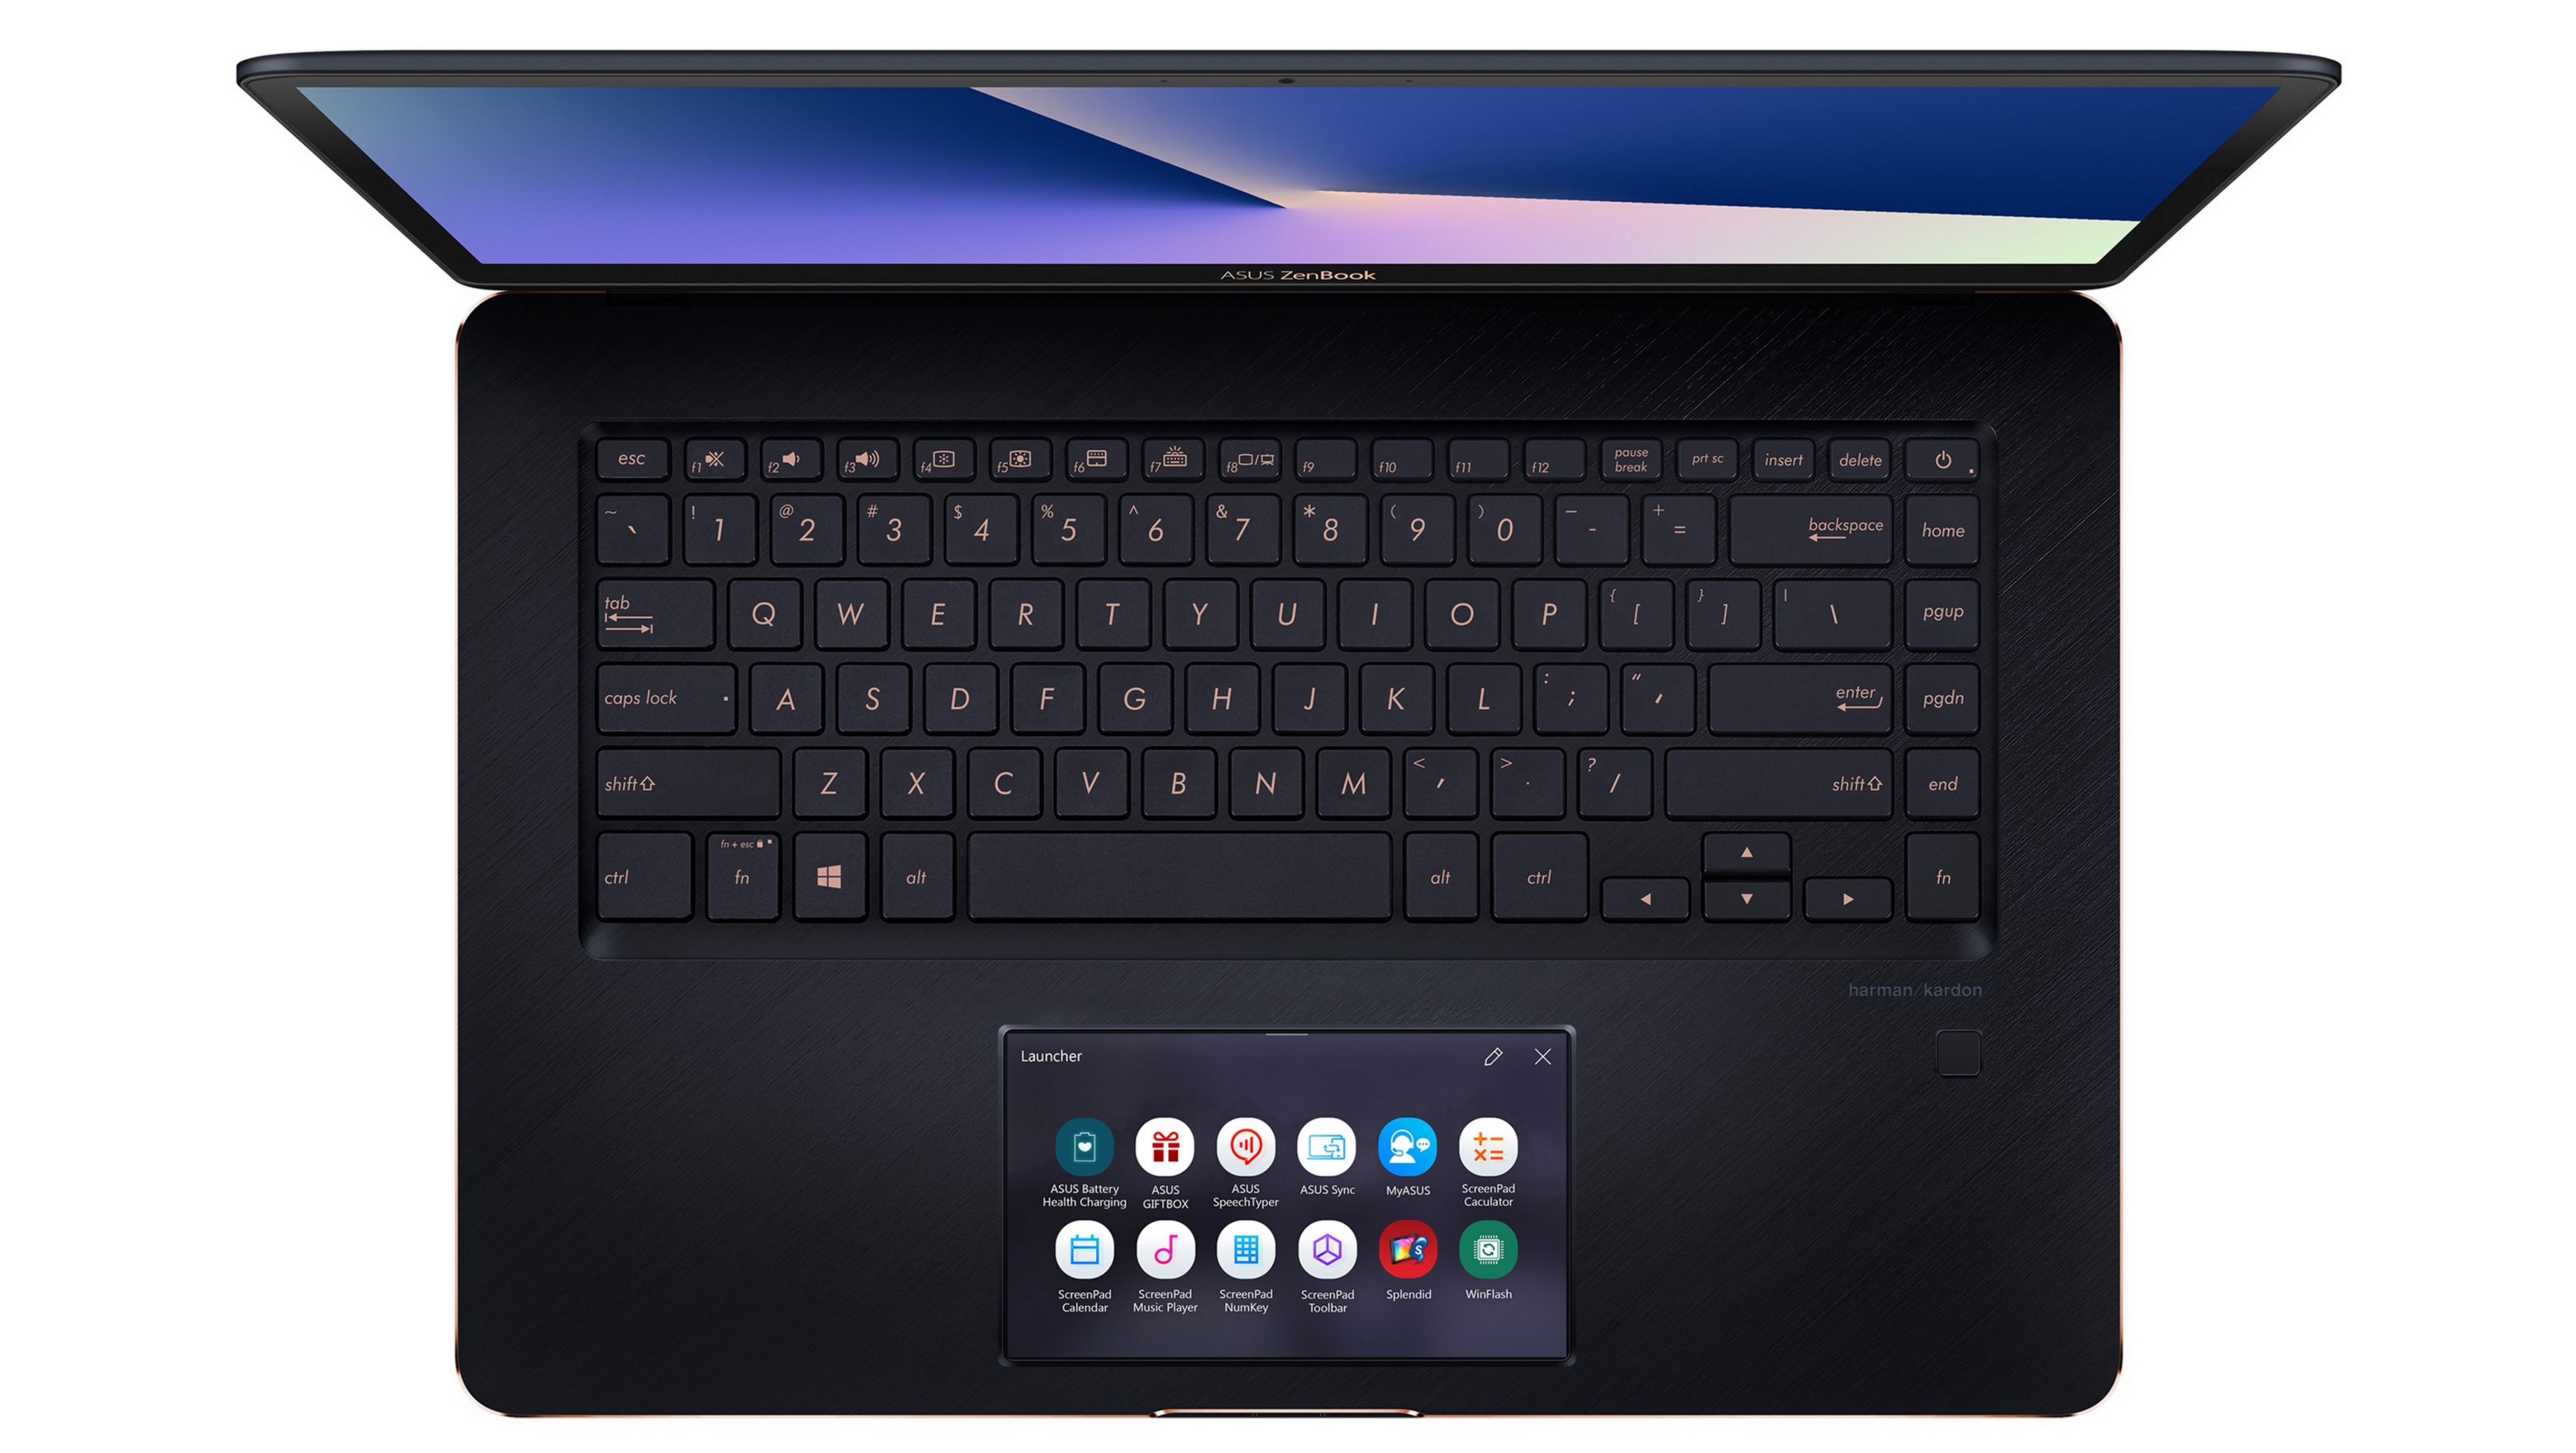 ASUS ZenBook touchpad